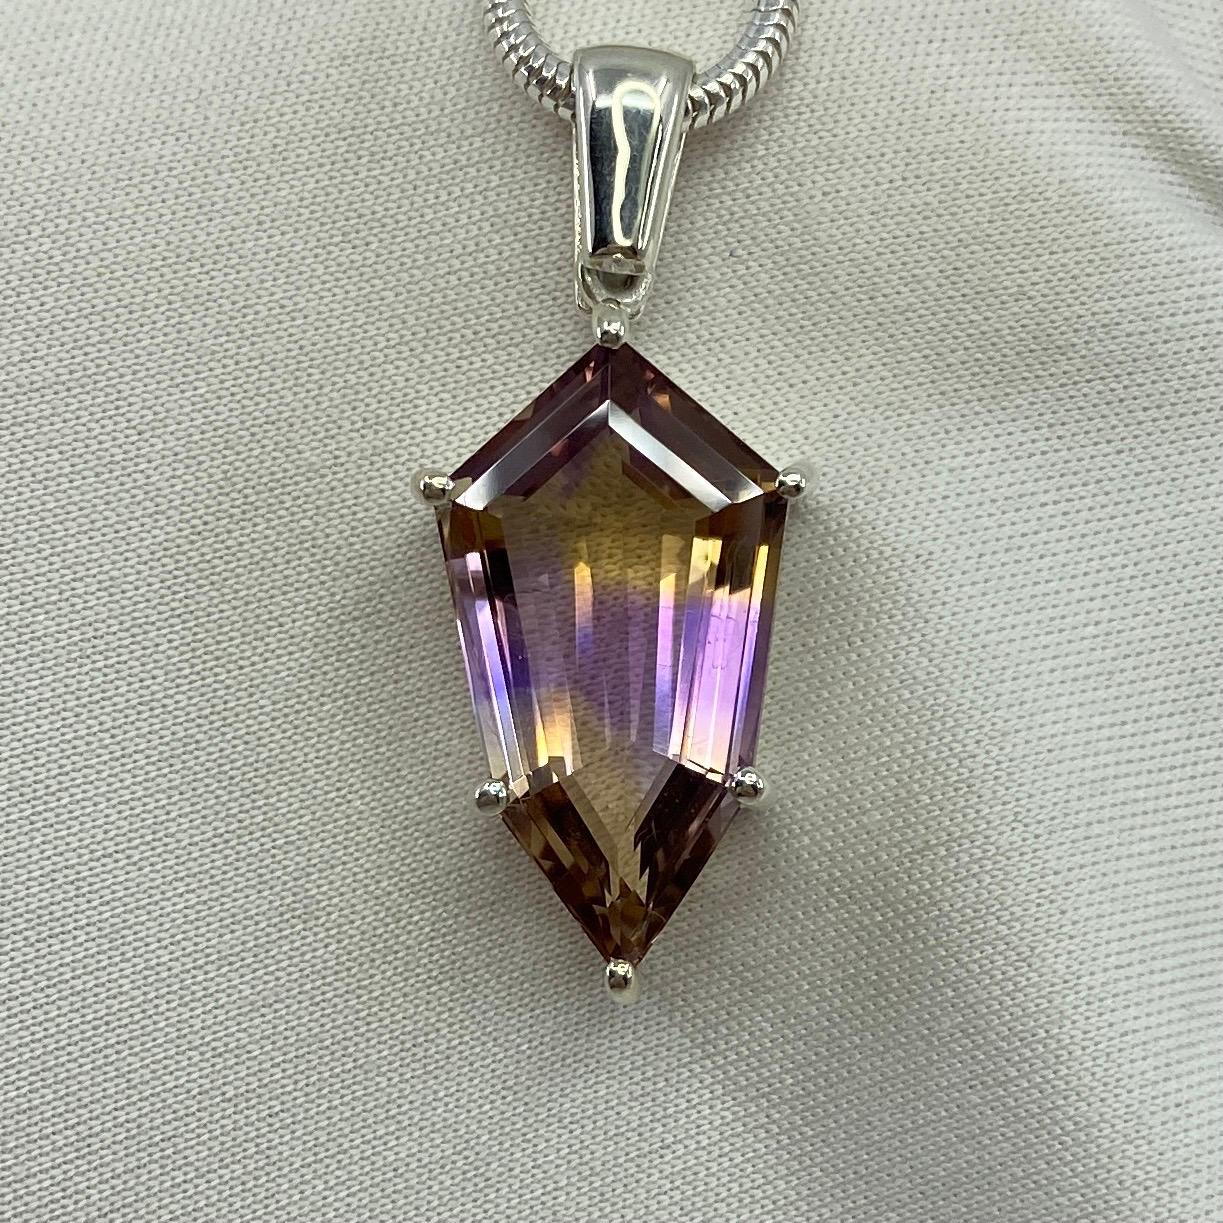 Natural Ametrine Shield Cut Silver Pendant Necklace.

Beautiful 8.23 carat ametrine with stunning yellow and purple colour zoning. Set in a bespoke 925 sterling silver solitaire pendant setting.
Stunning ametrine with beautiful colour and excellent